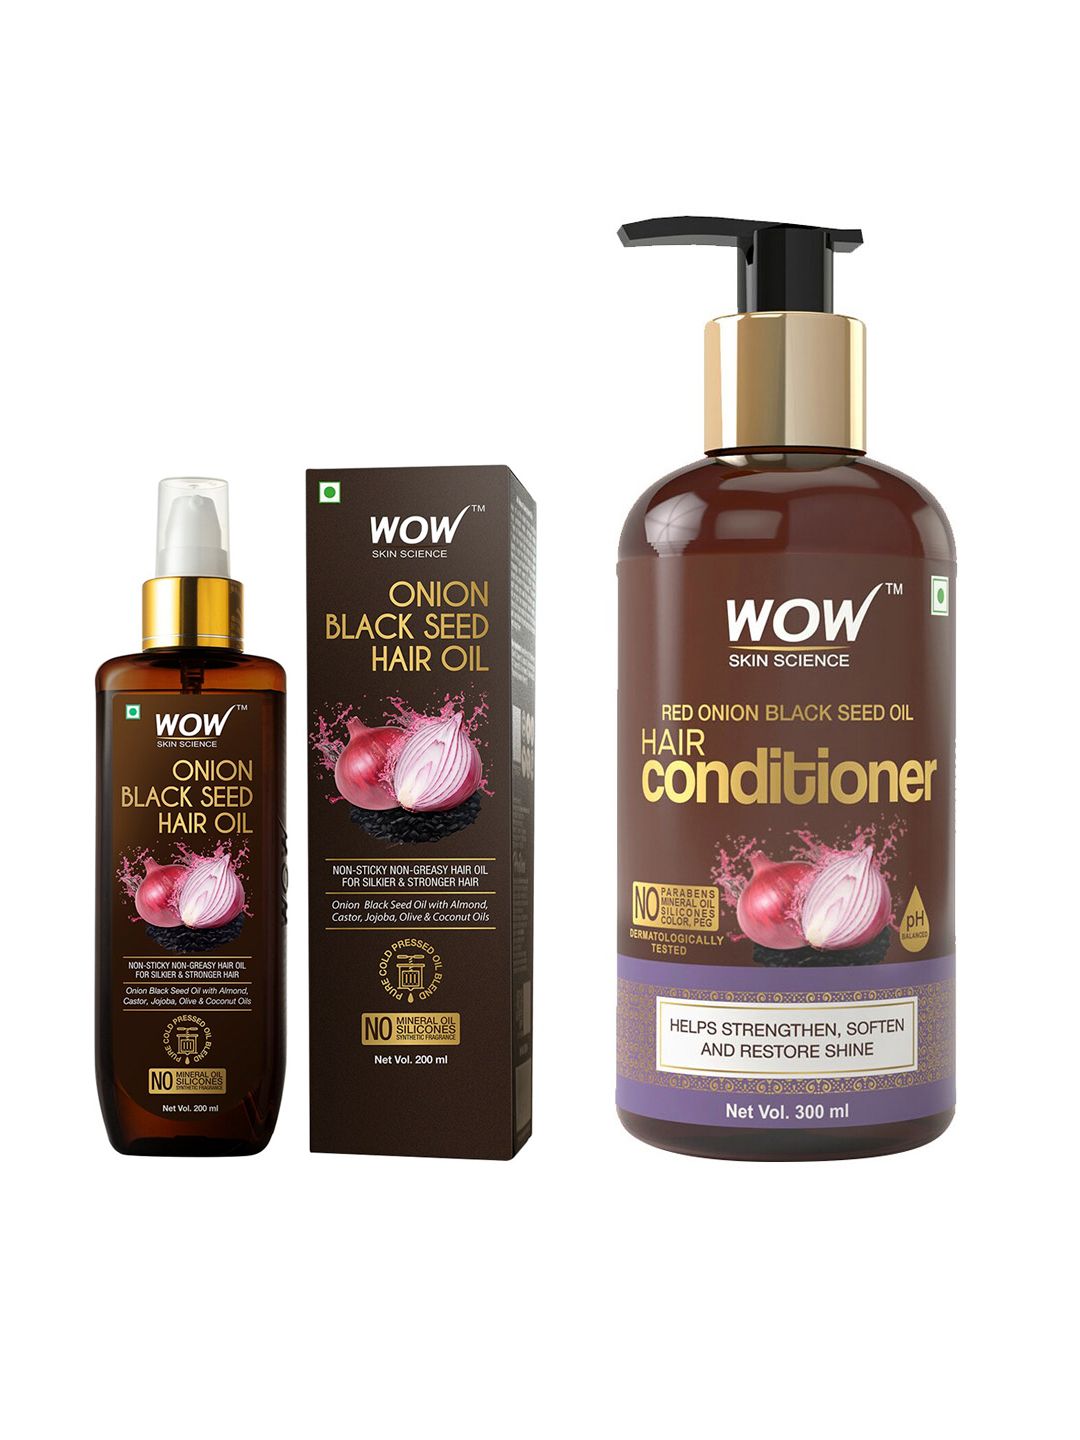 WOW SKIN SCIENCE Set of Onion Black Seed Oil Hair Conditioner & Hair Oil Price in India